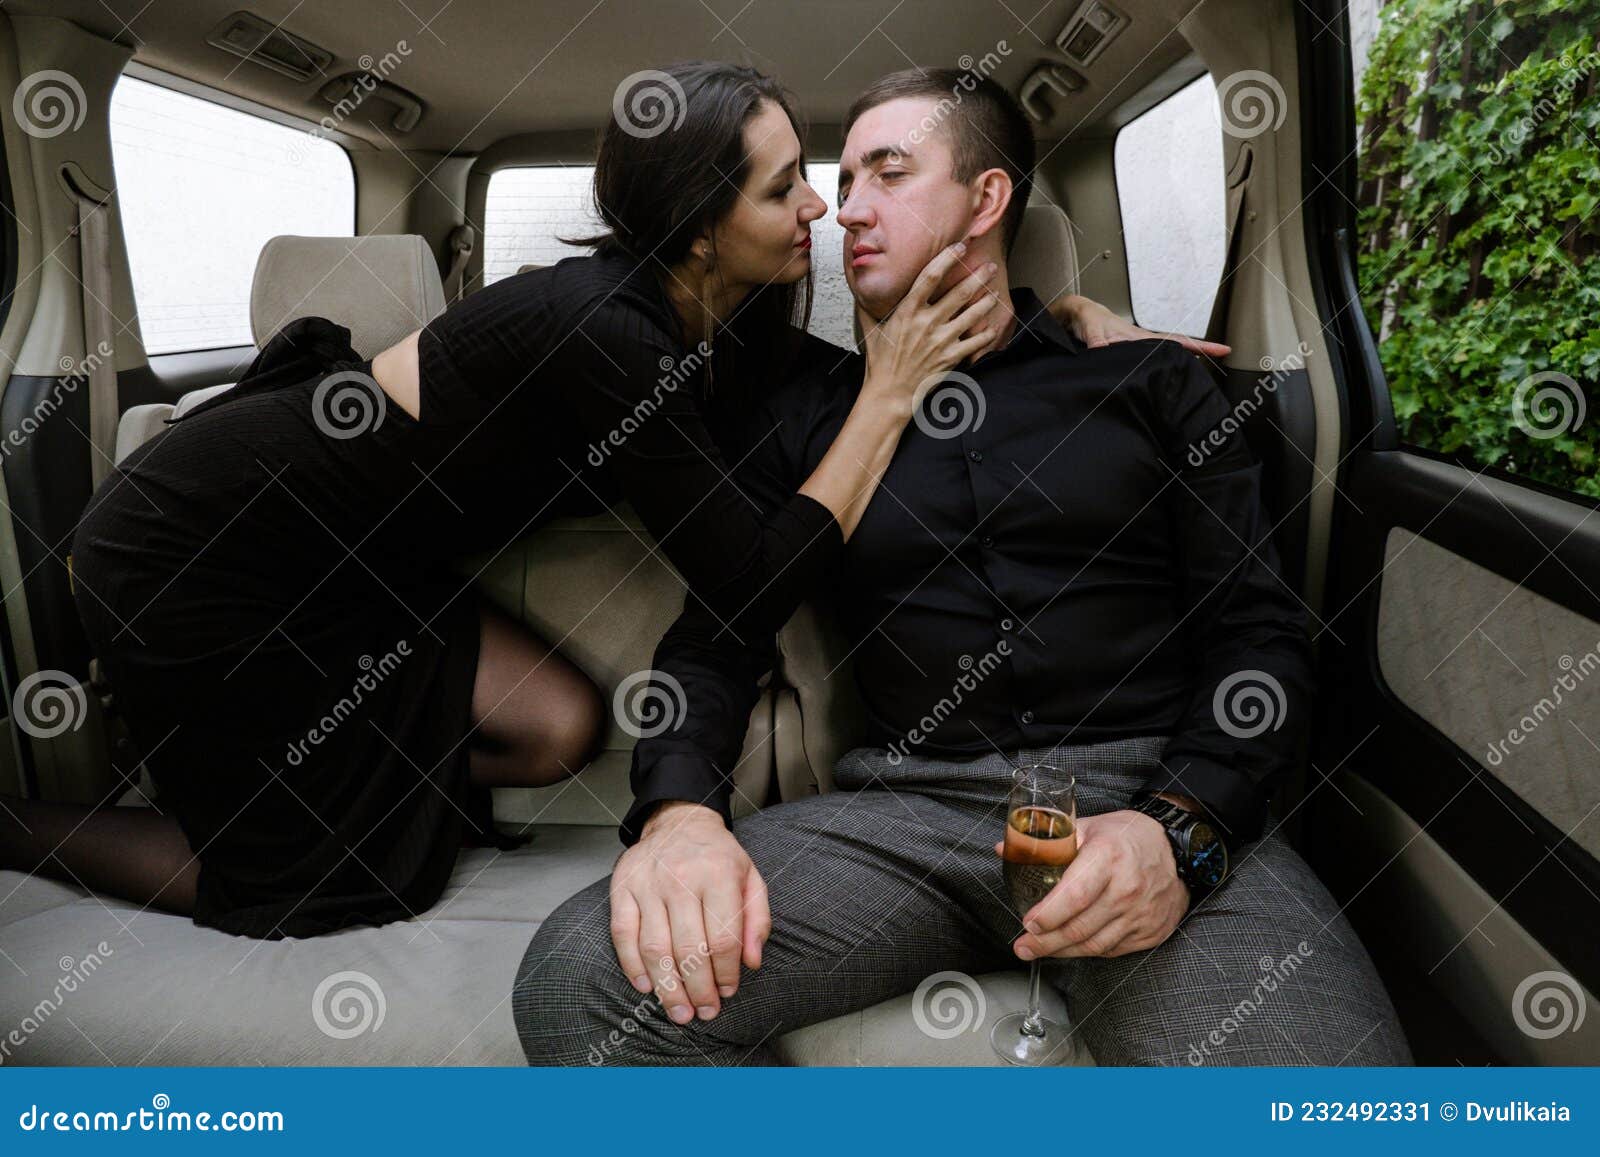 Young Woman Kissing Handsome Young Man in pic